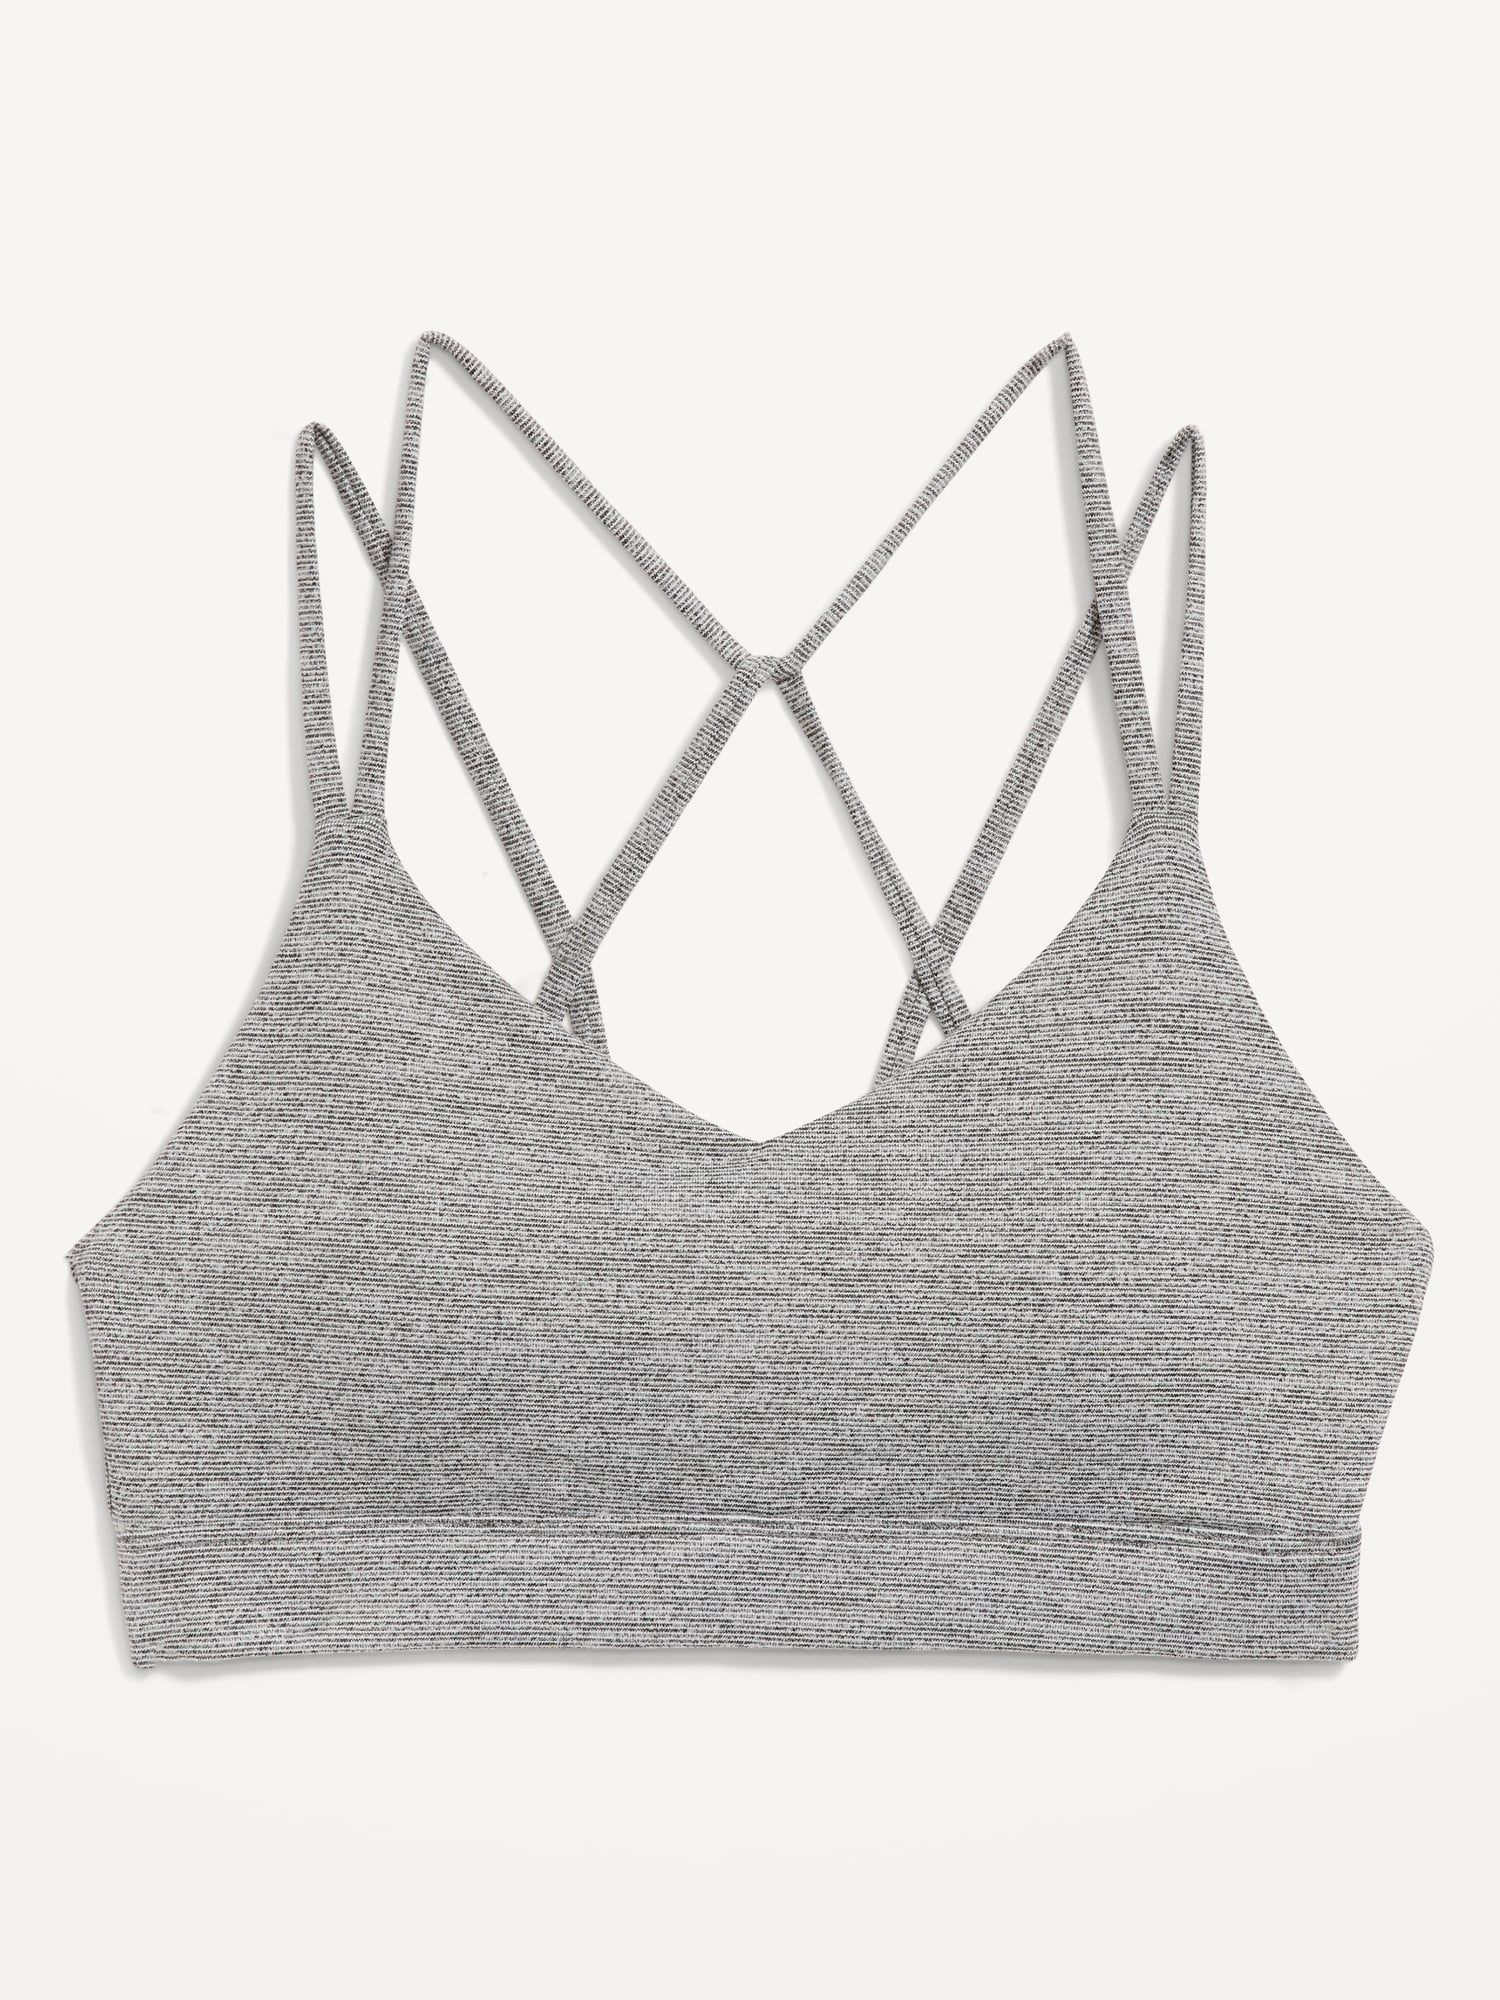 Like New Condition Women's Old Navy White and Light Grey Sports Bra, Size  Small